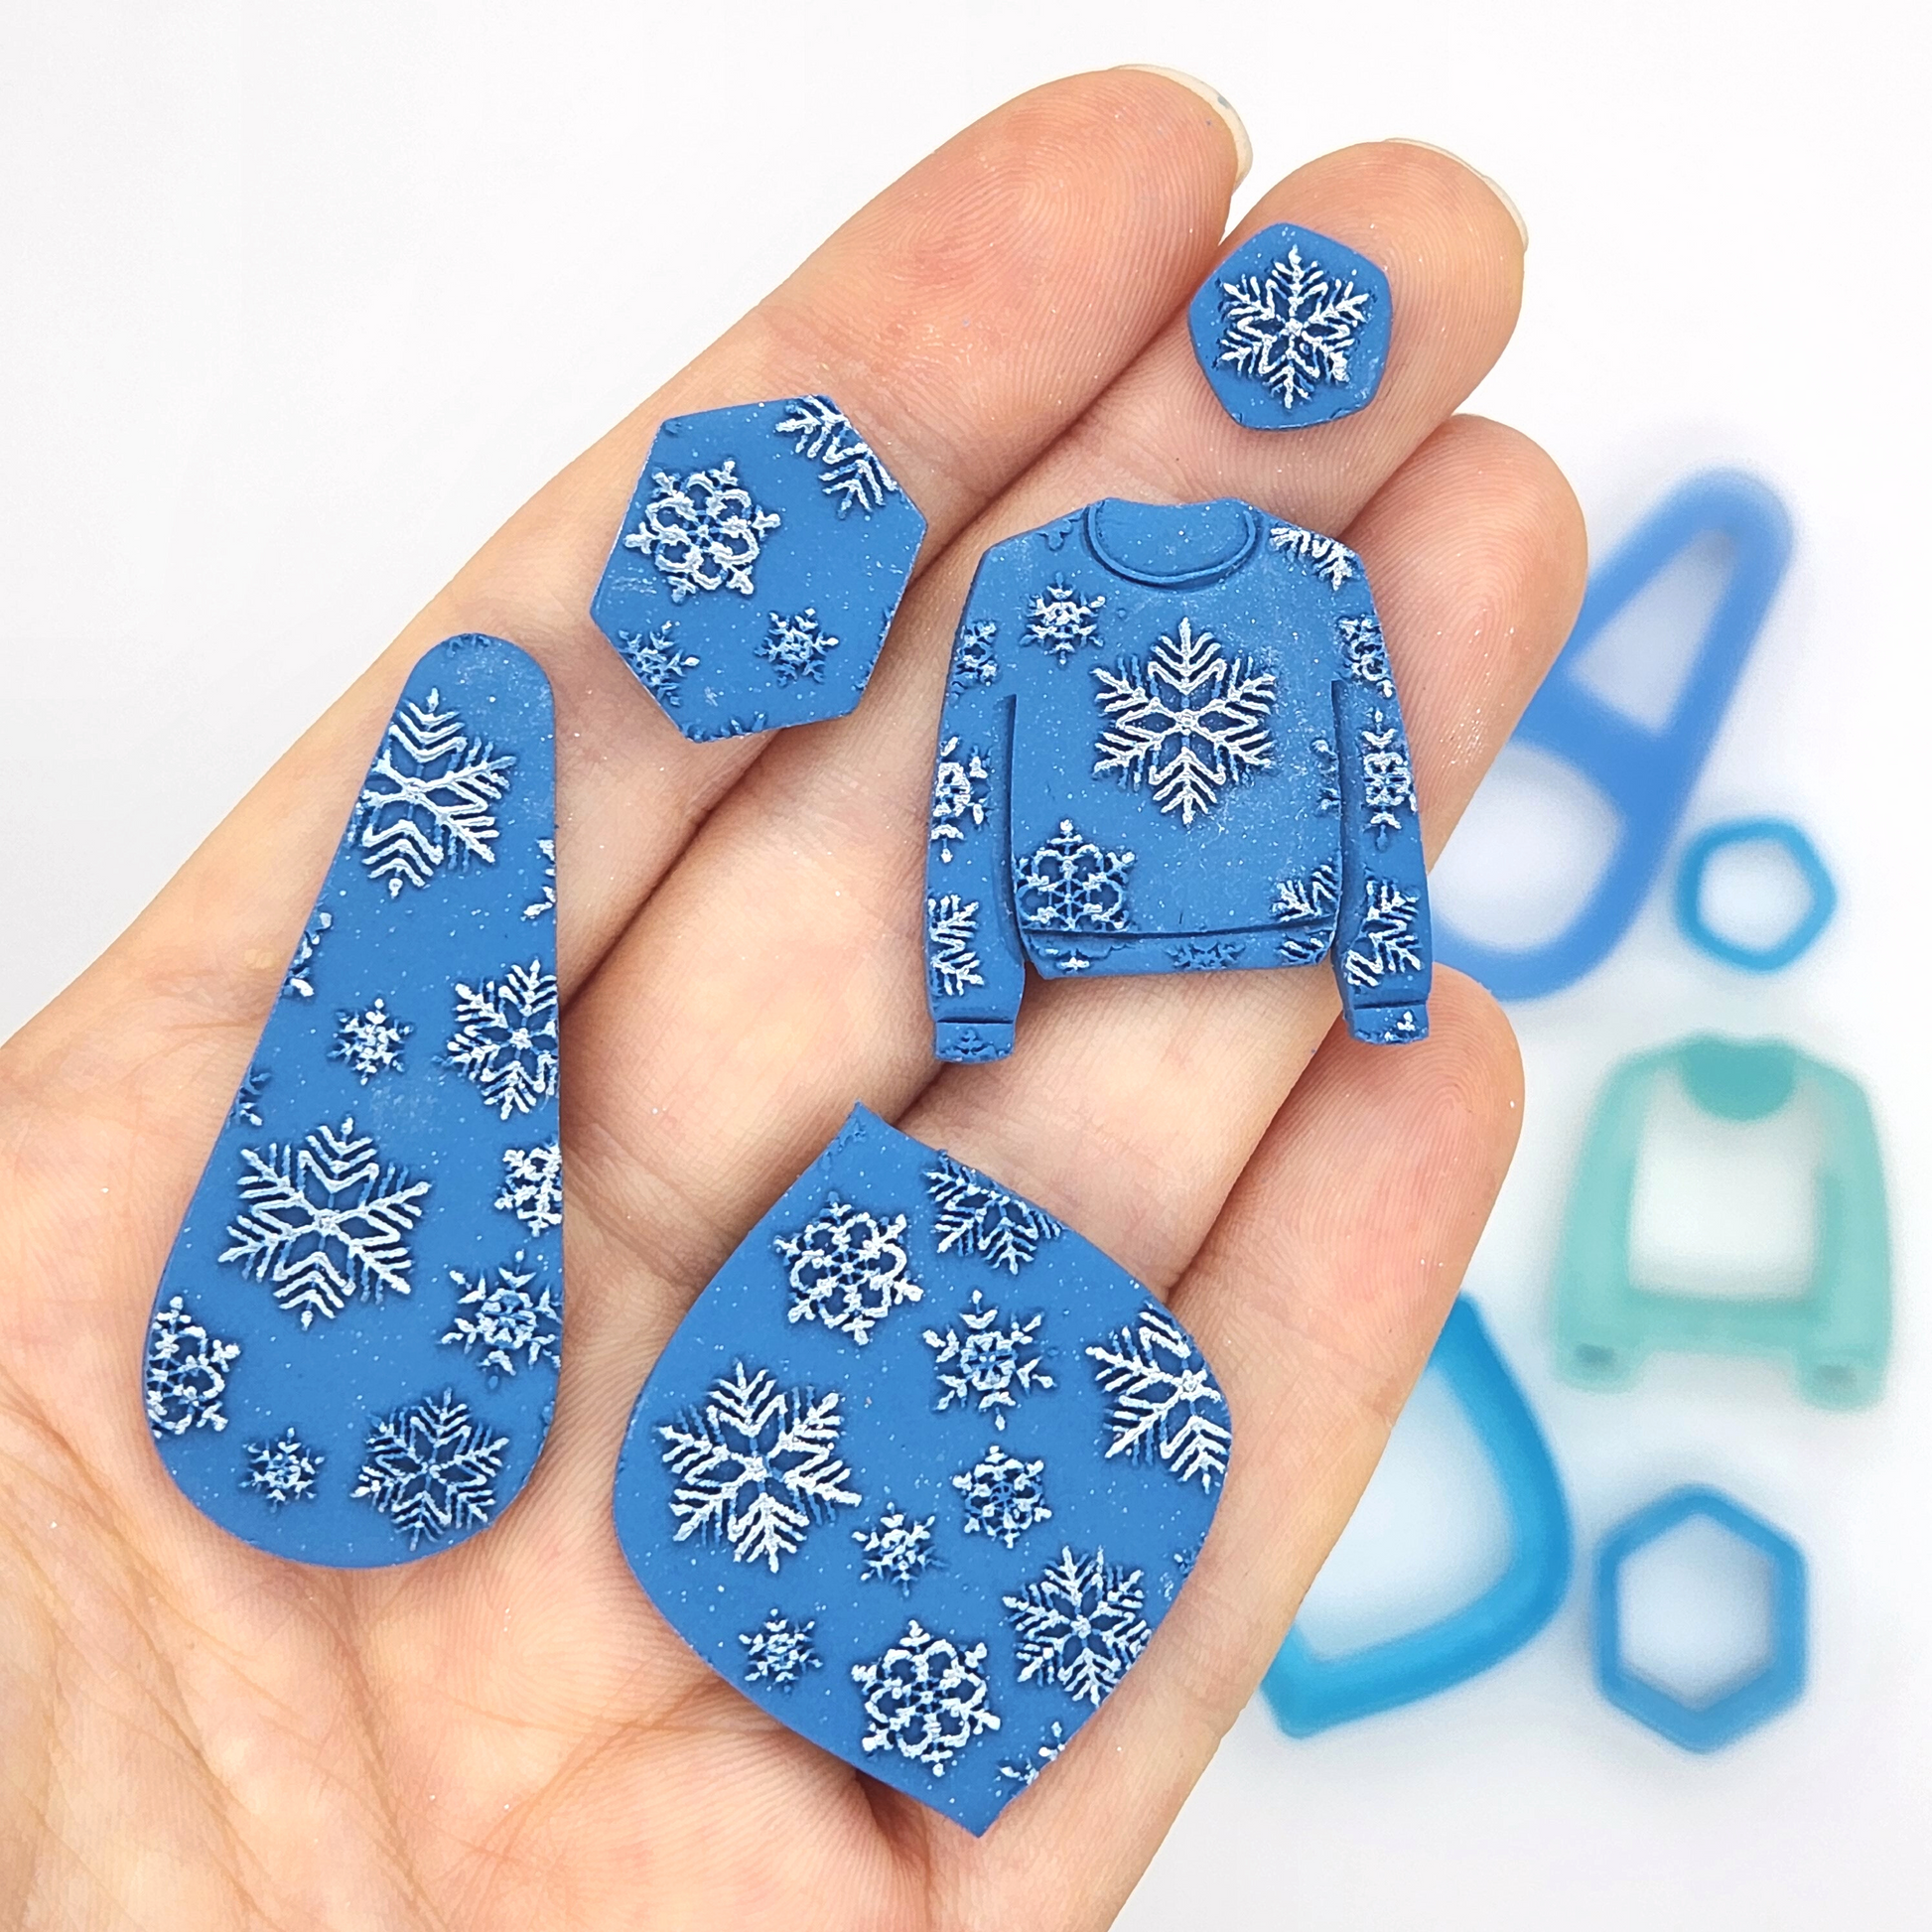 Winter Christmas Snowflake Design Texture for Polymer Clay Earrings Jewelry Pendant Charms Ornaments Crafts